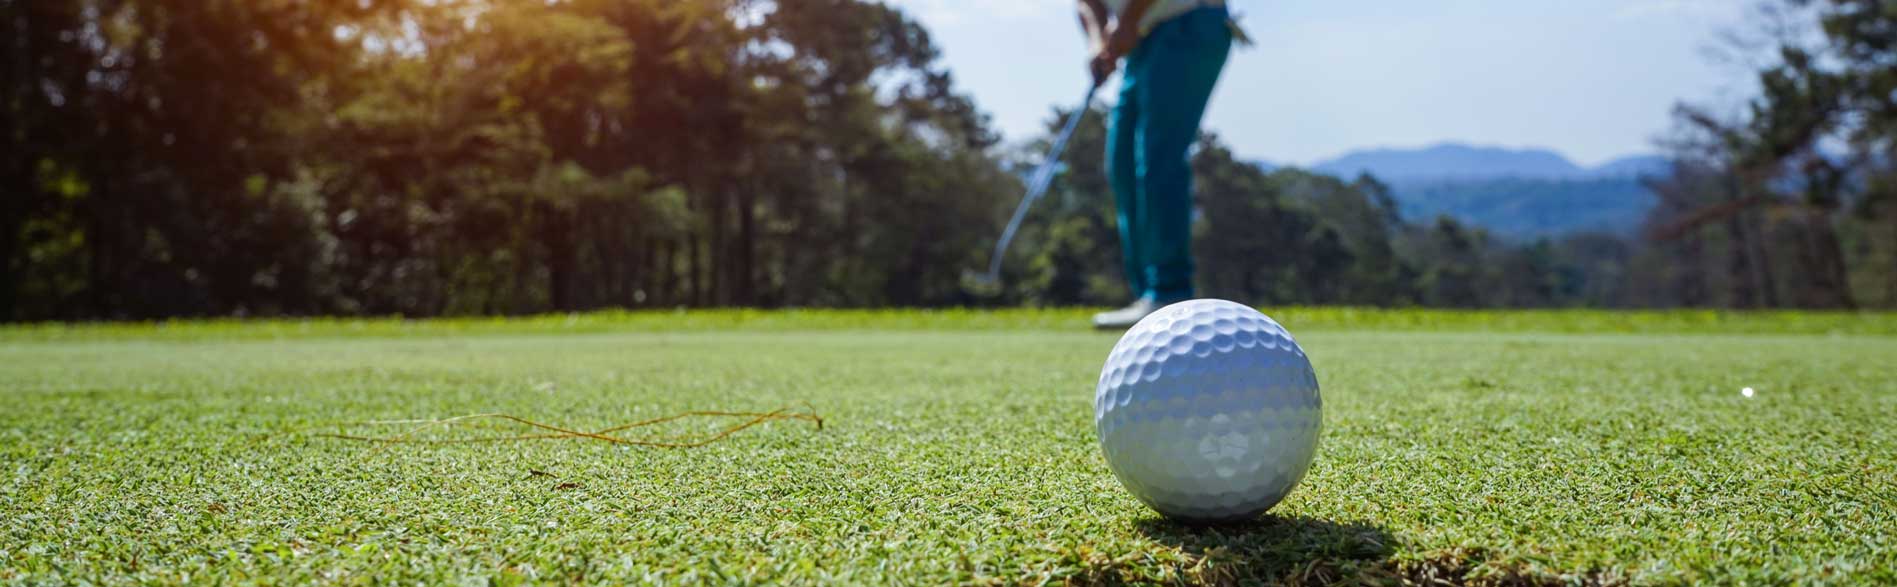 Putting Greens Synthetic Turf made in USA golf enthusiast